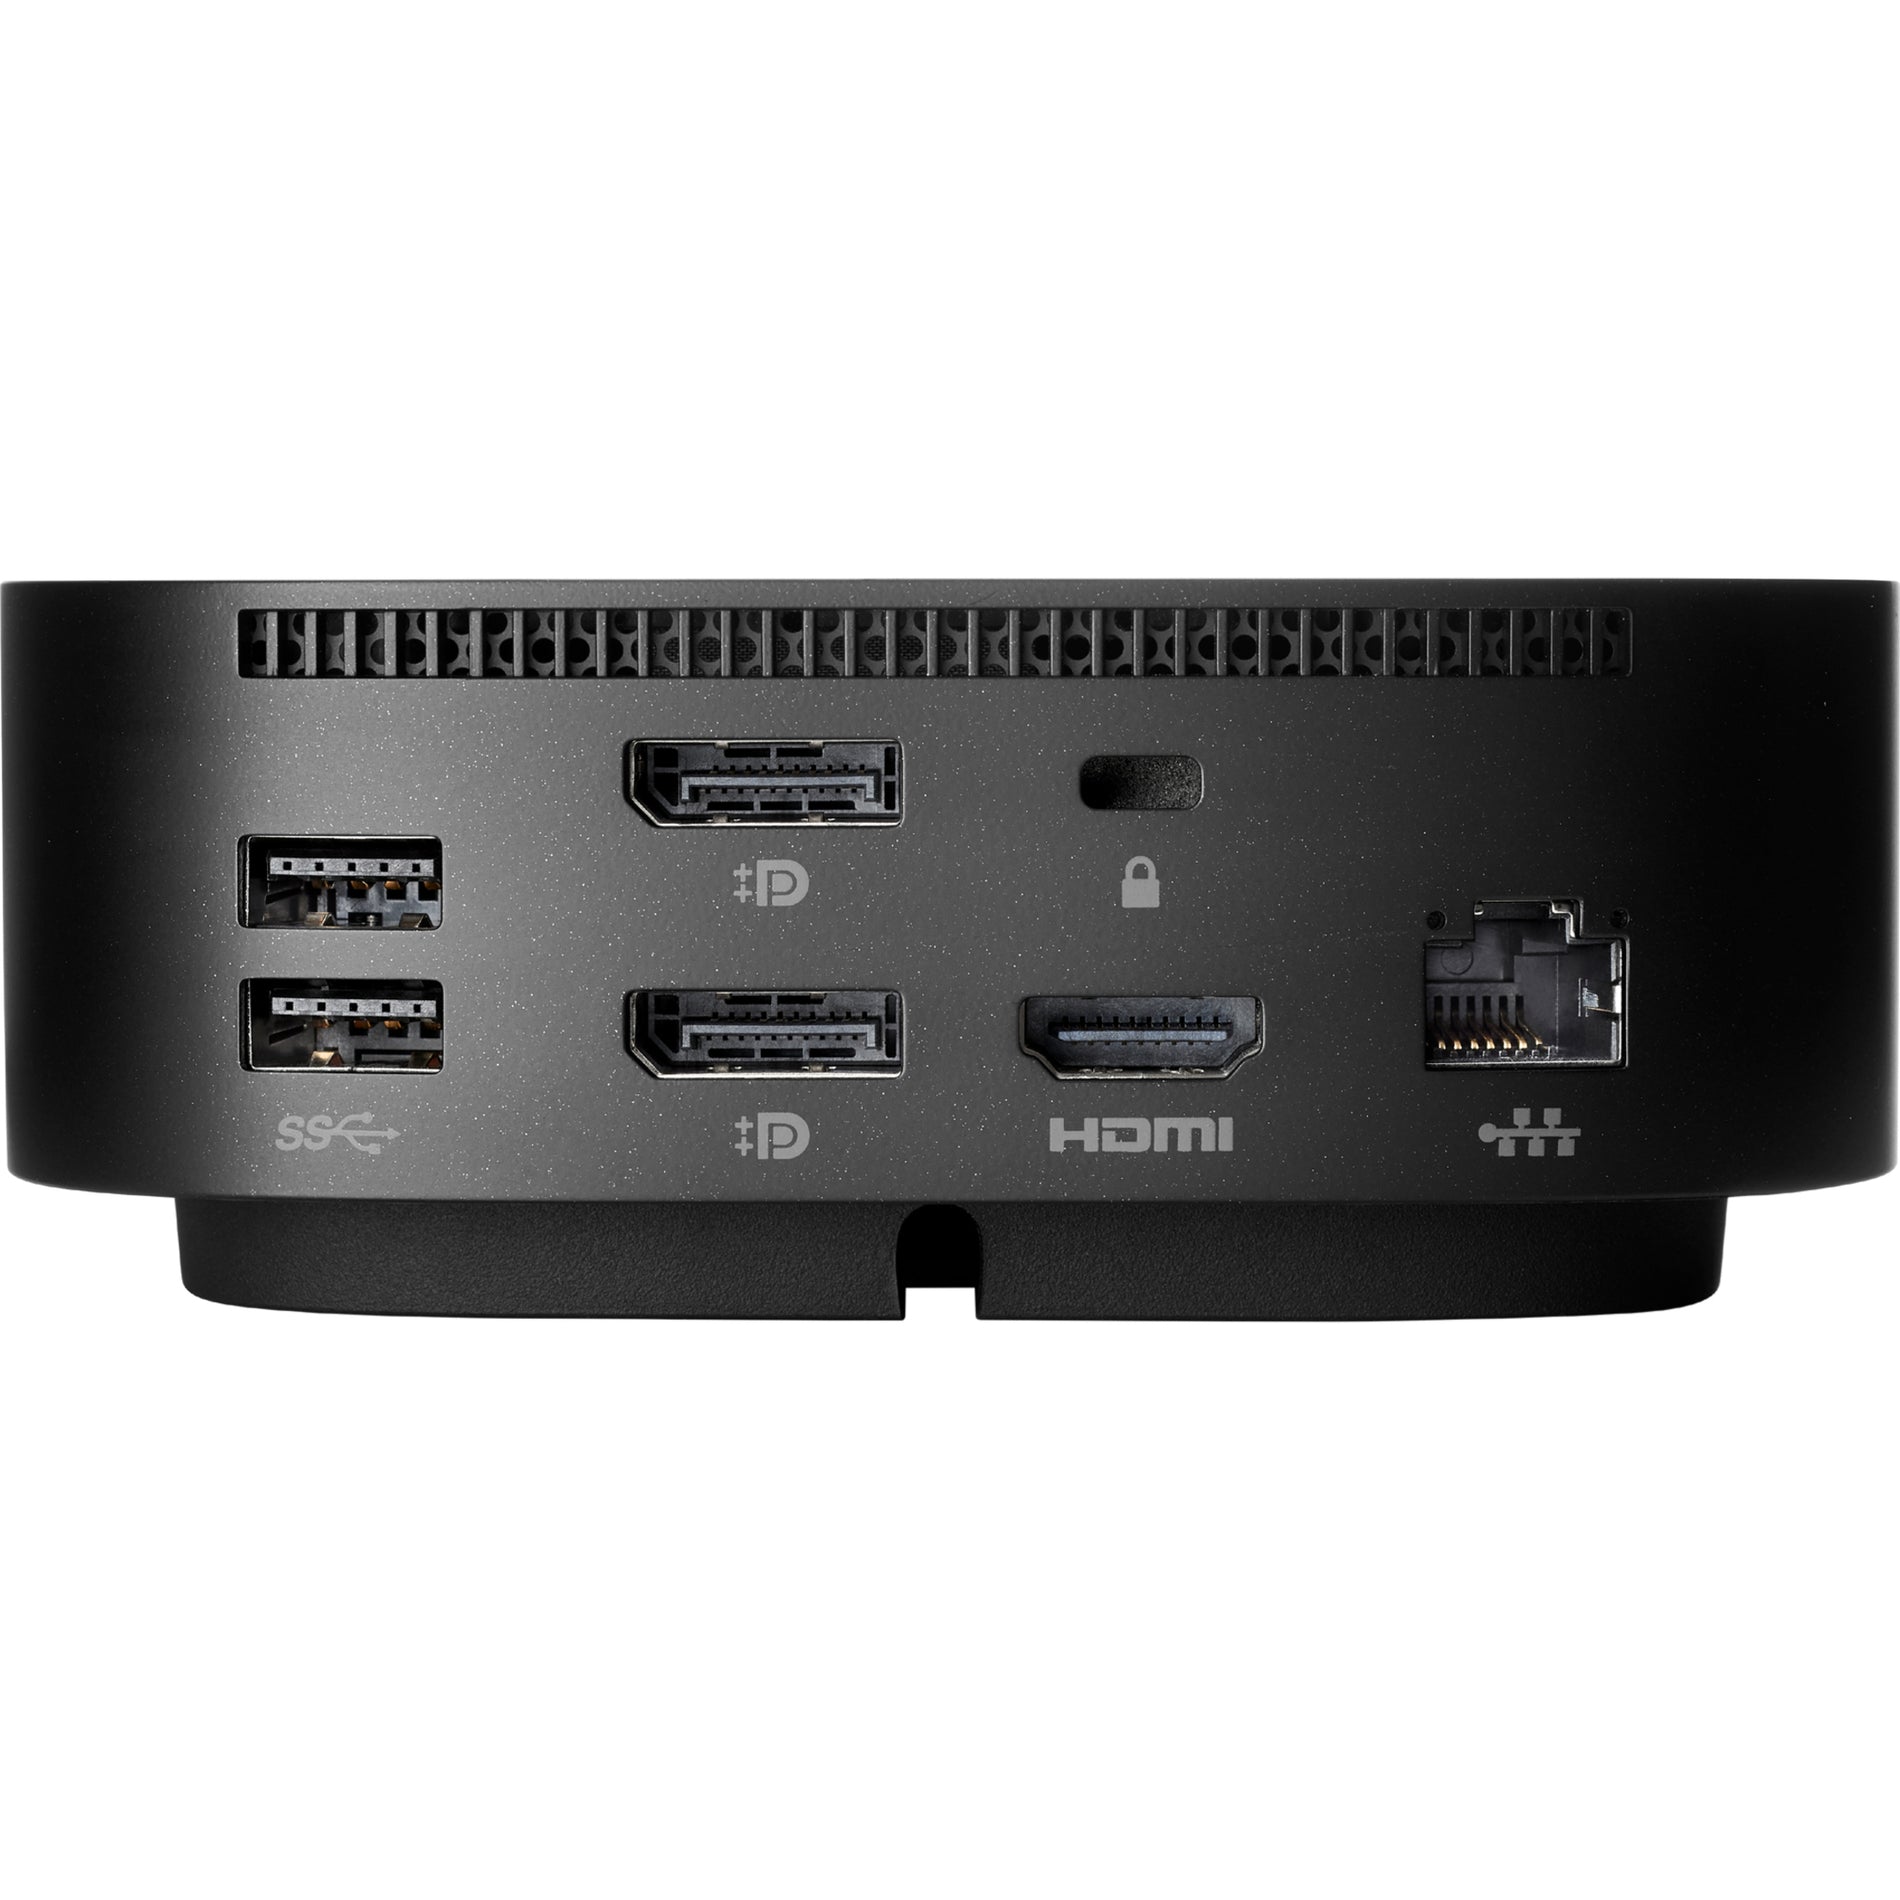 HP USB-C/A Universal Dock G2, 6-Port Docking Station with HDMI, DisplayPort, USB 3.0, RJ-45, and Power Delivery